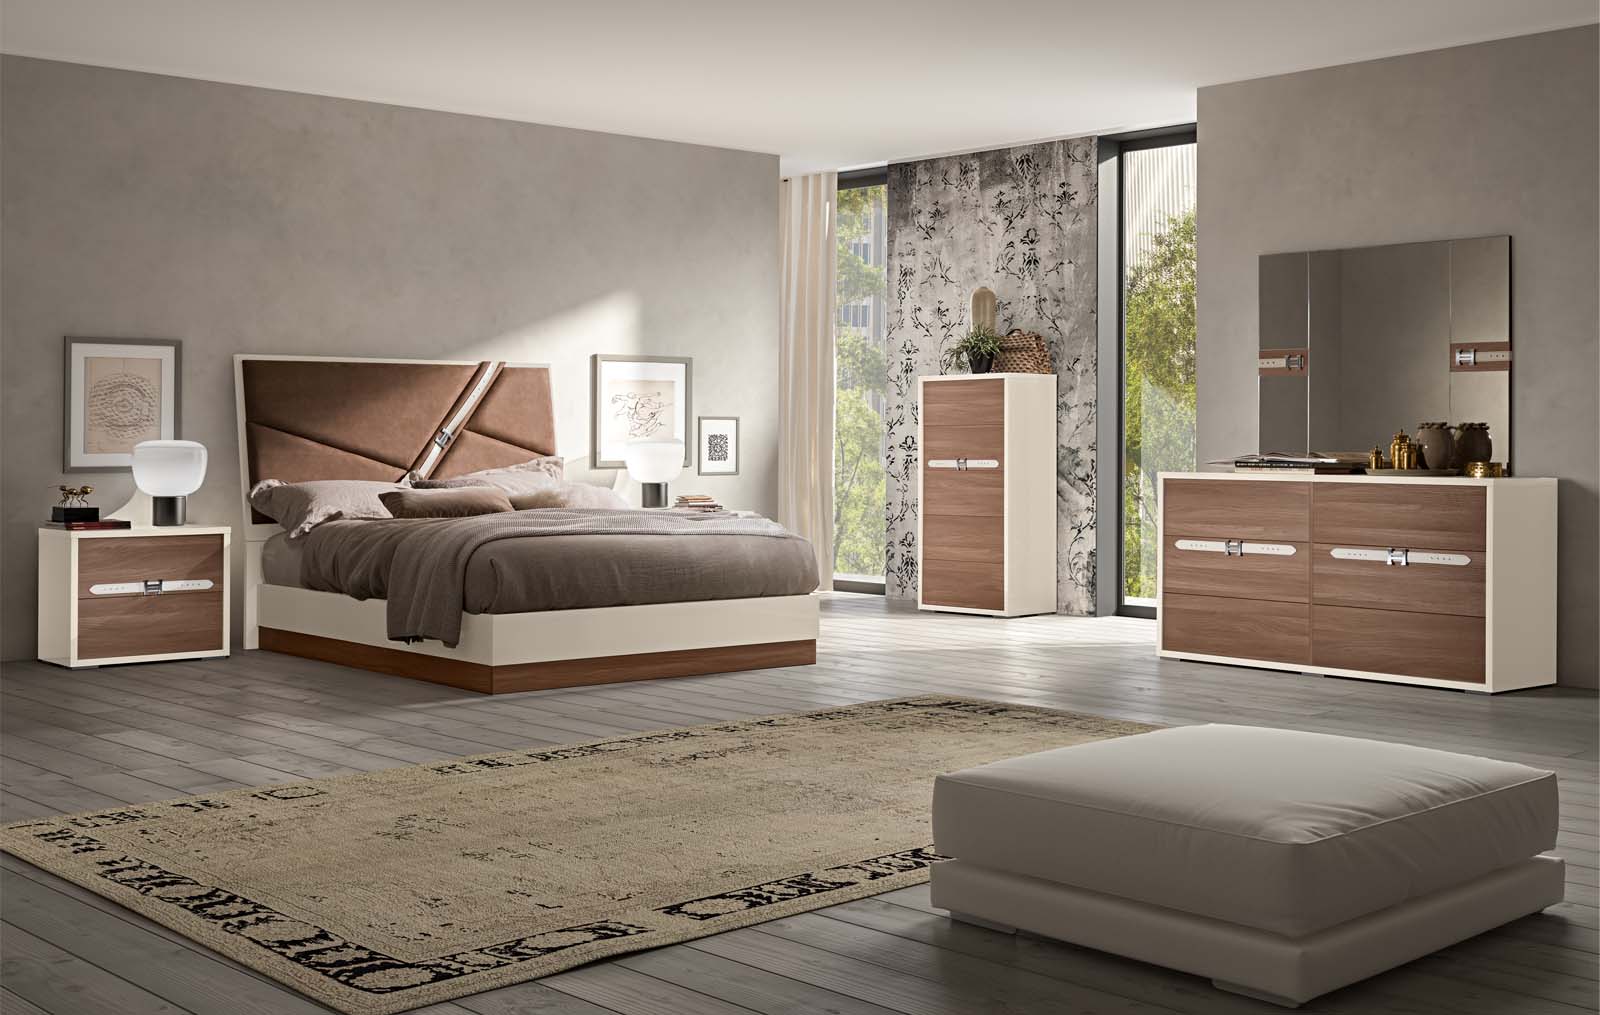 Made in Italy Wood Designer Bedroom Furniture Sets with ...